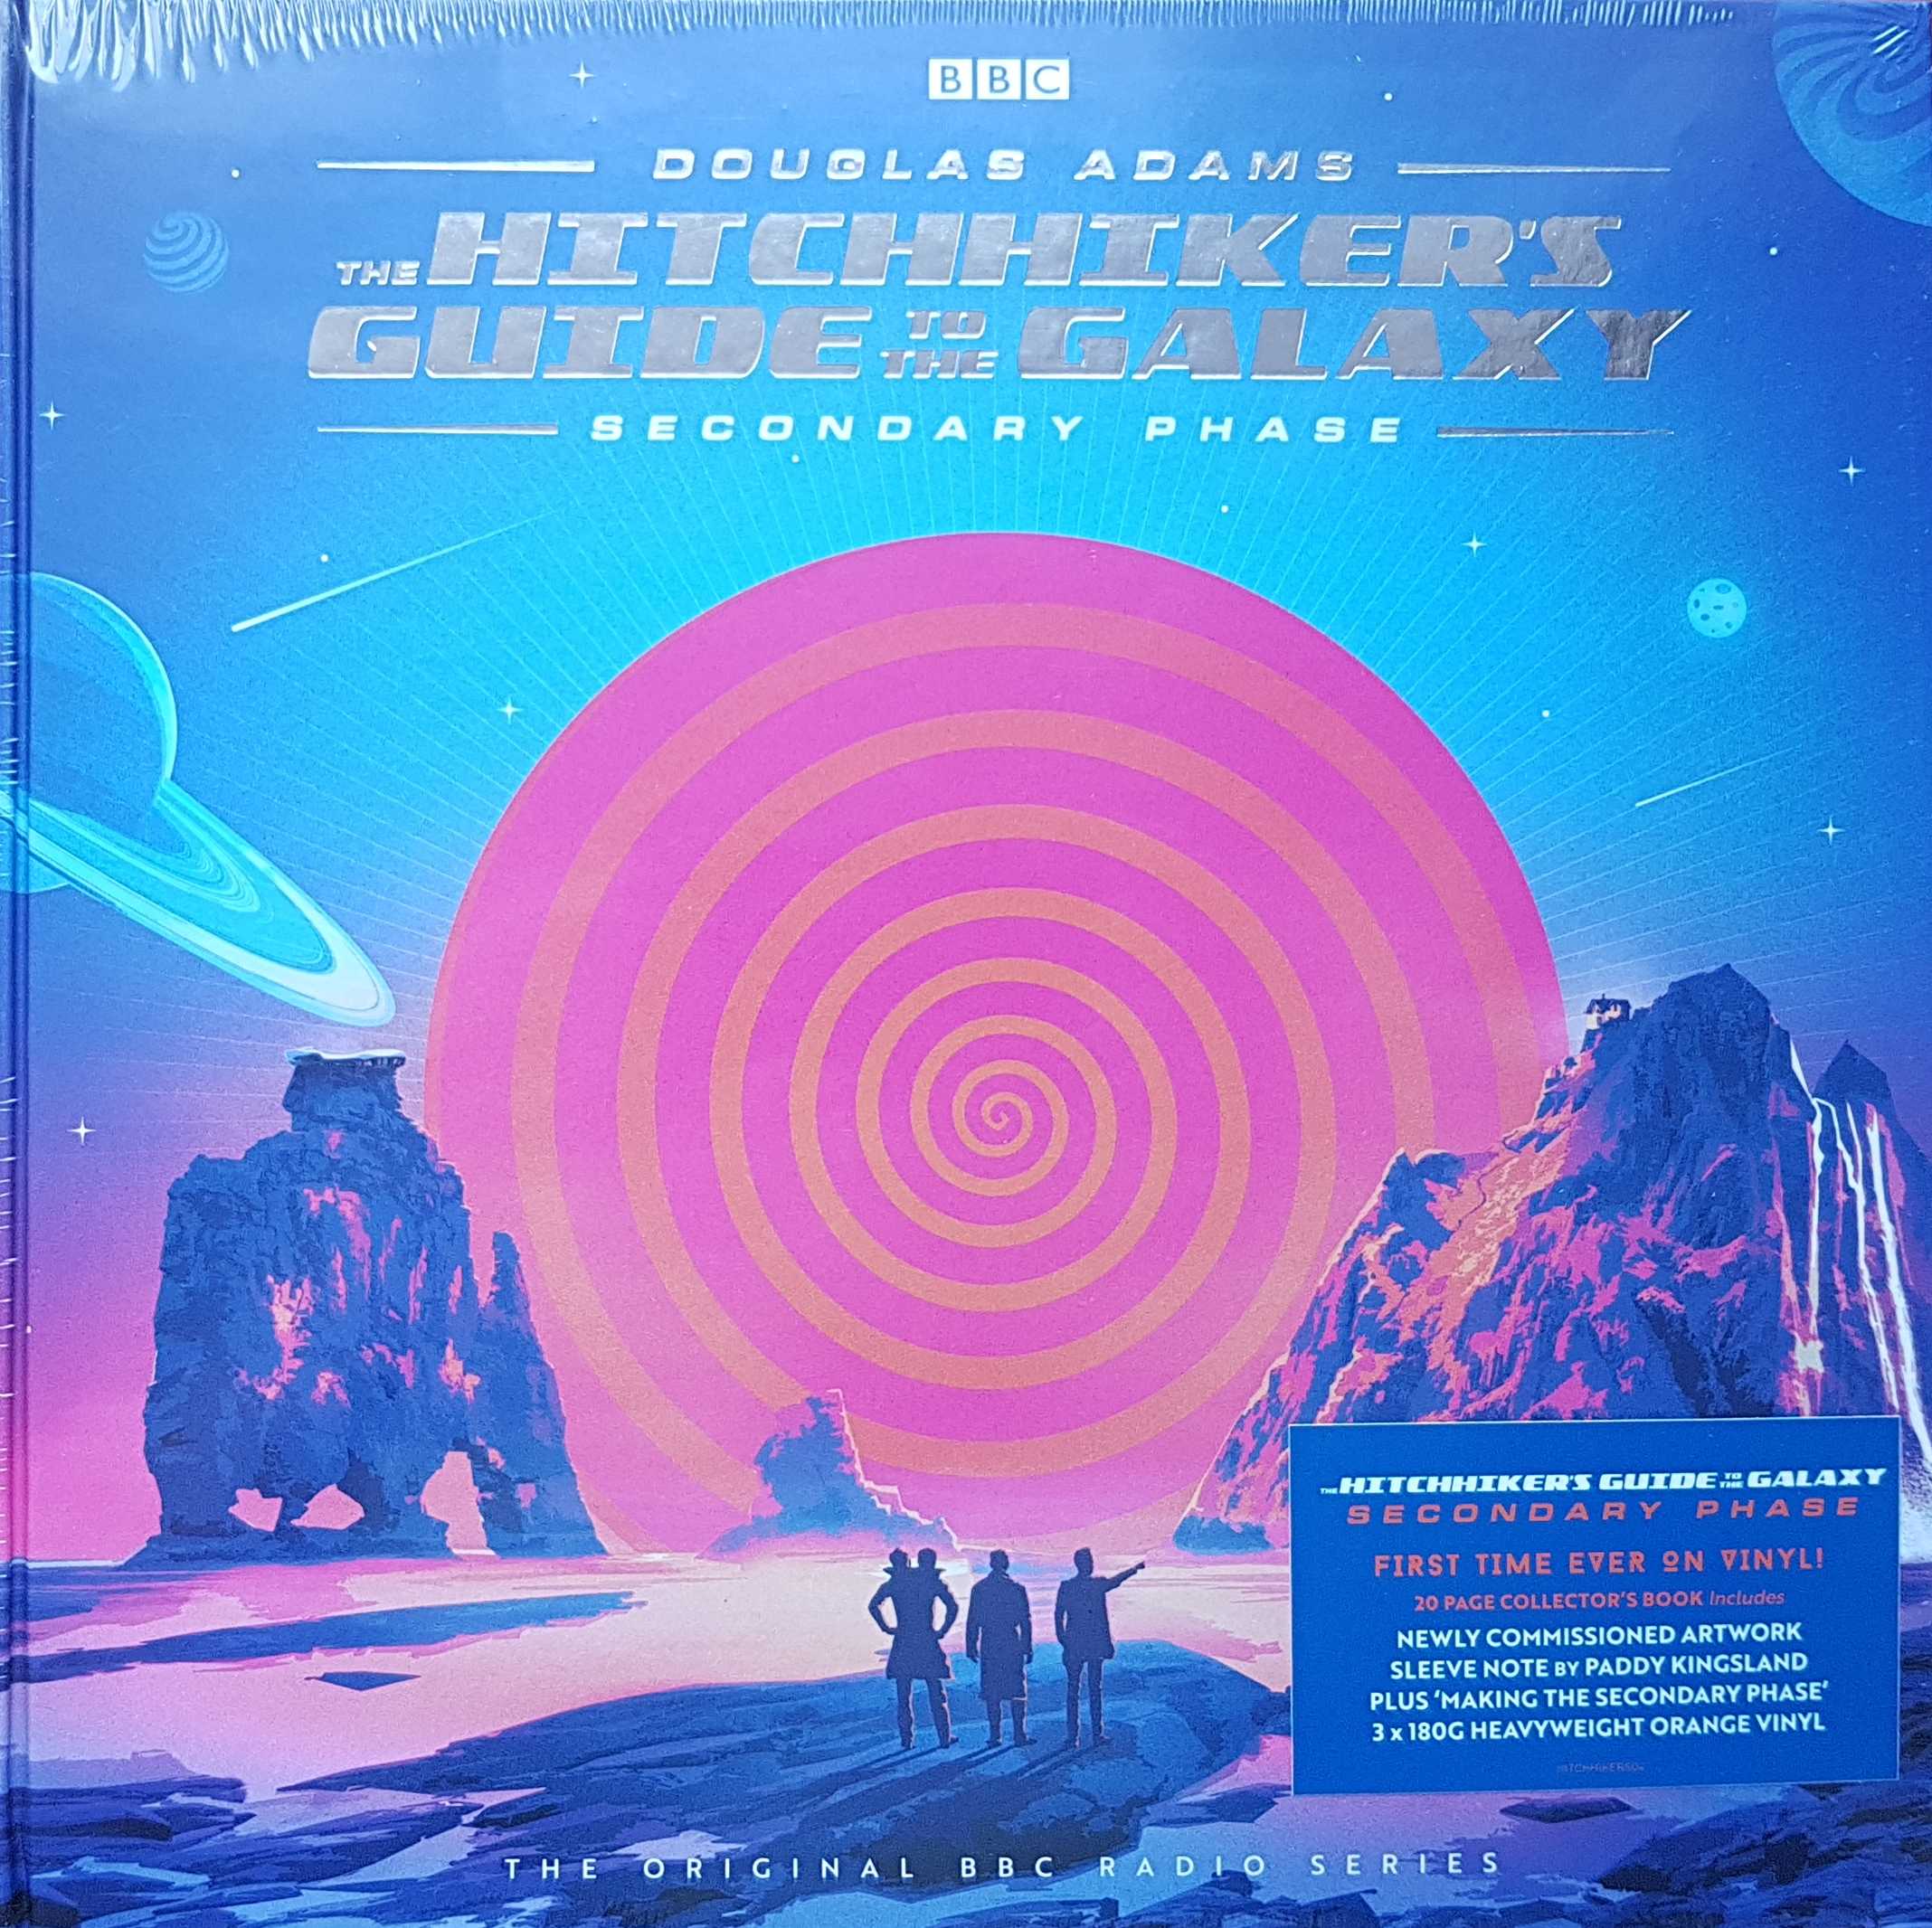 Picture of HITCHHIKERS02 The hitch-hiker's guide to the galaxy - Secondary phrase (Limited edition coloured vinyl) by artist Douglas Adams from the BBC albums - Records and Tapes library